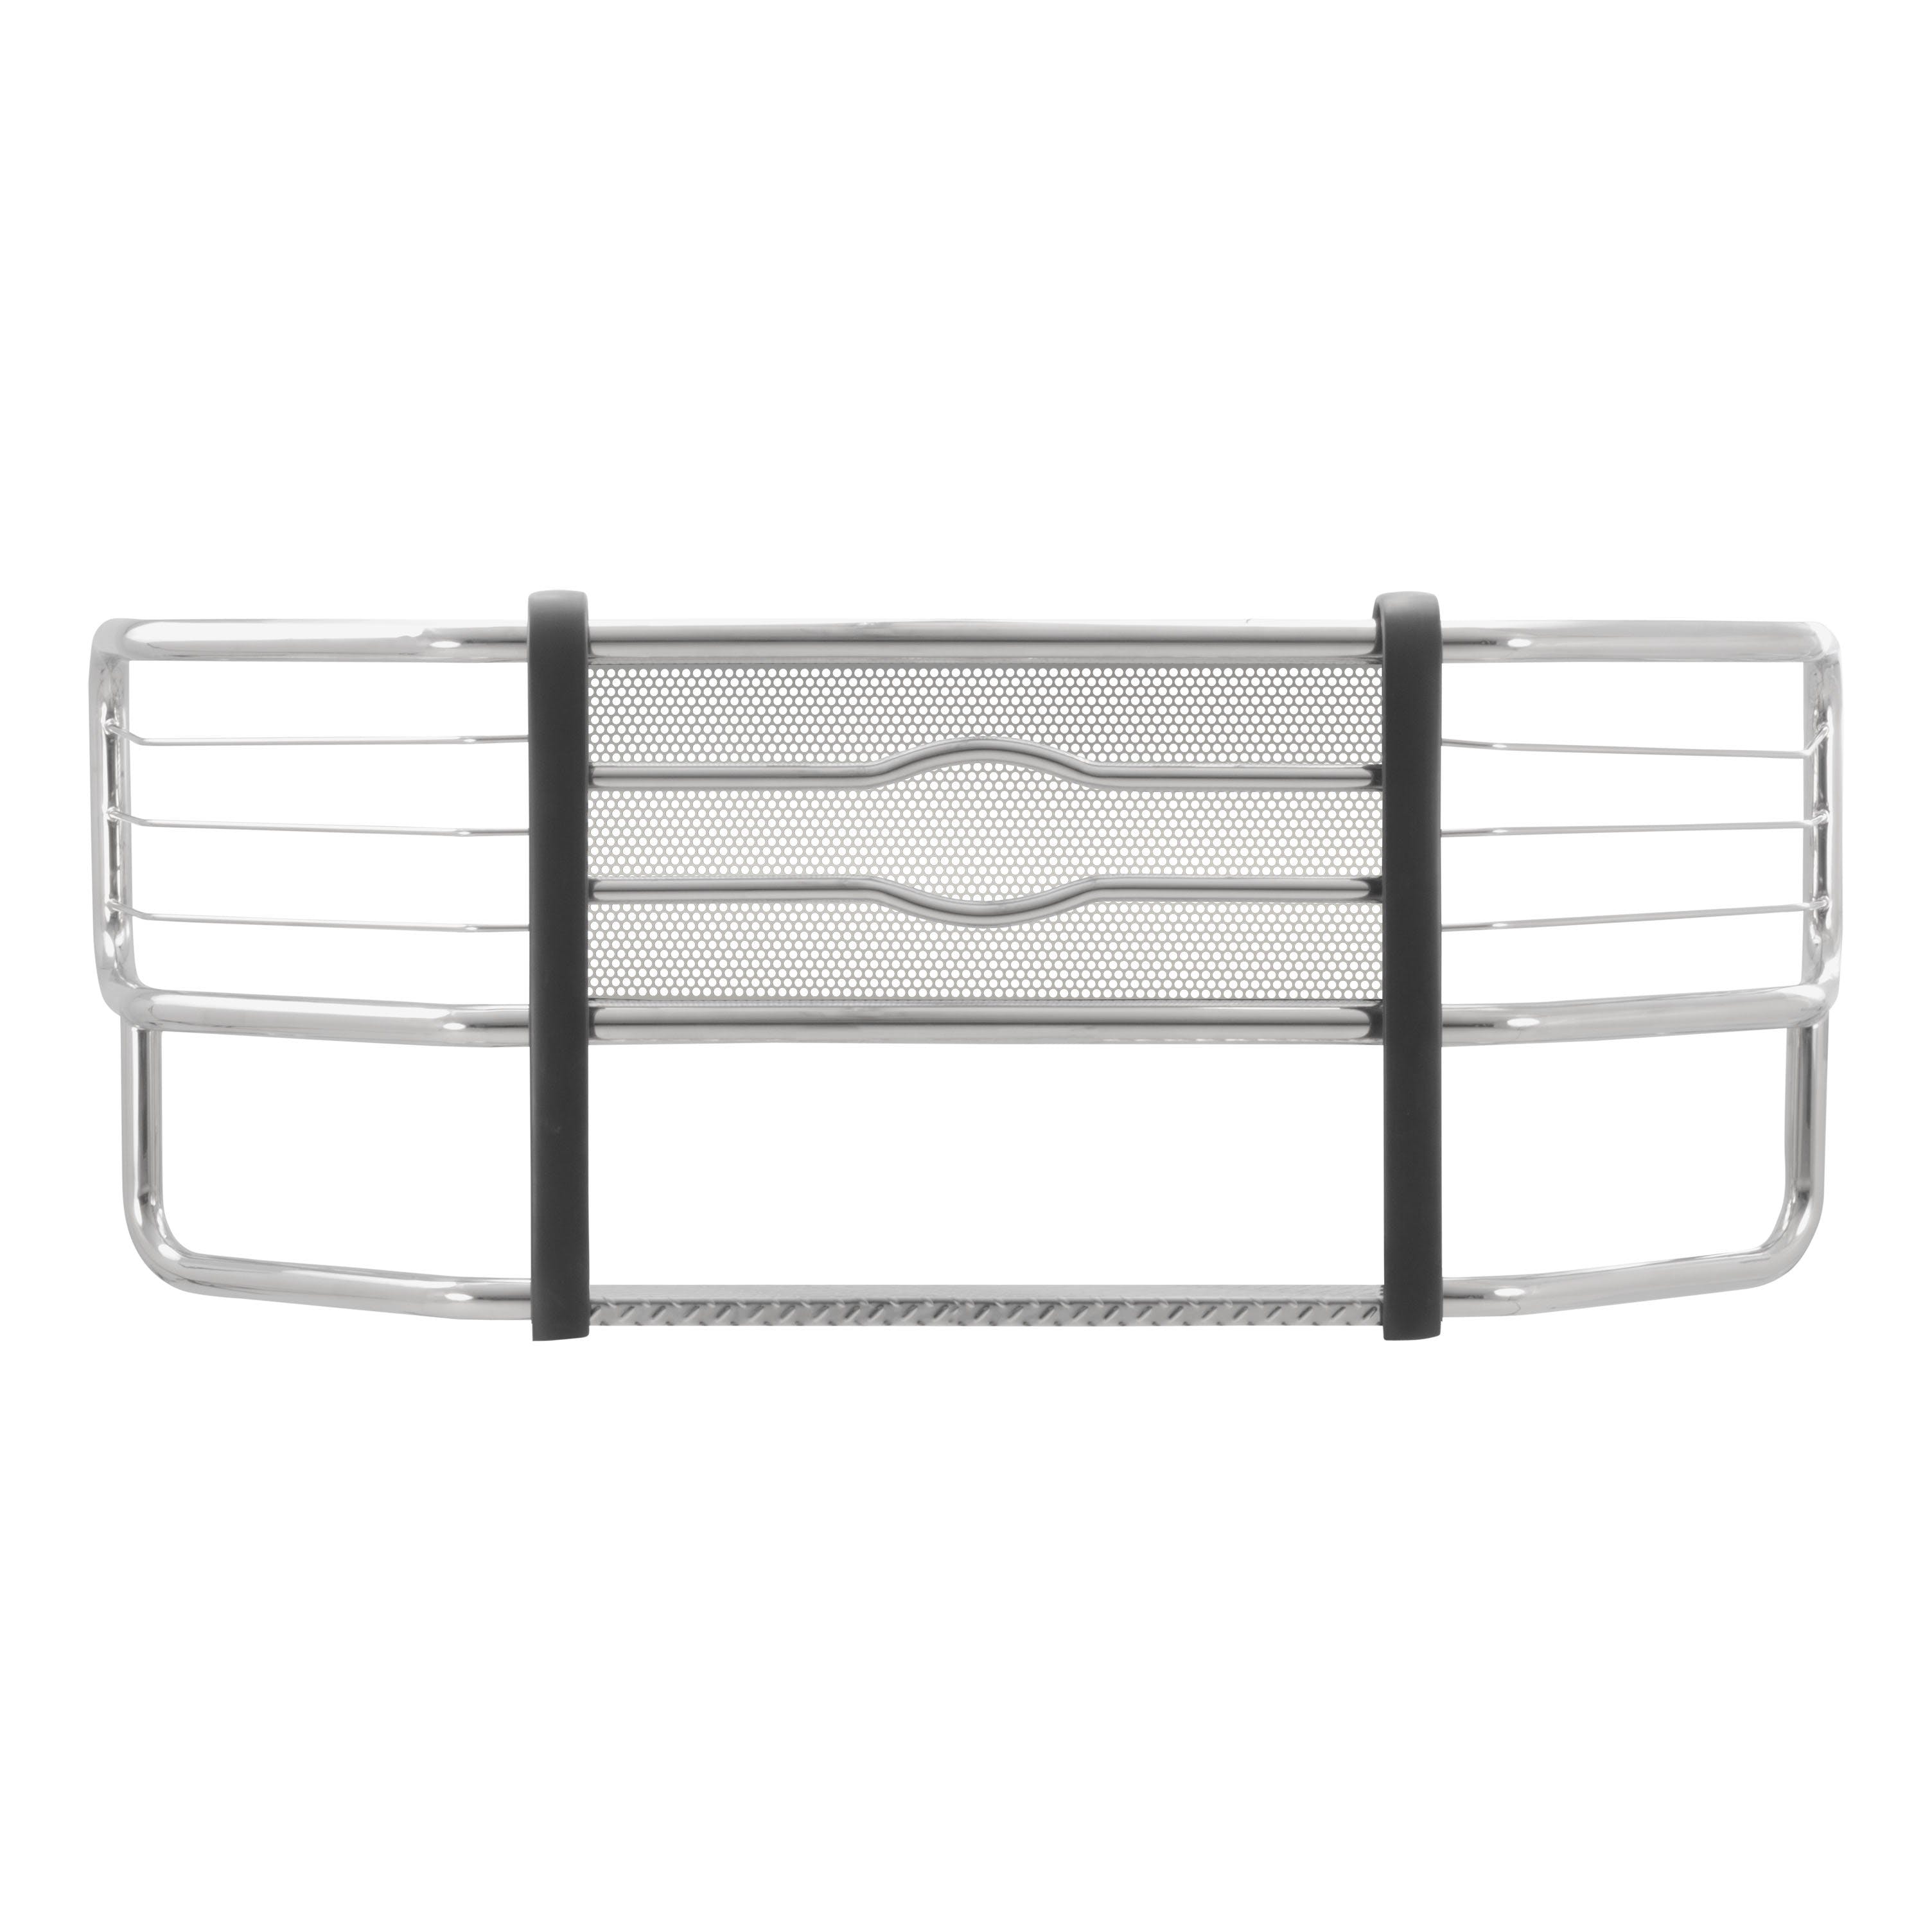 LUVERNE 310933 Prowler Max Grill Guard